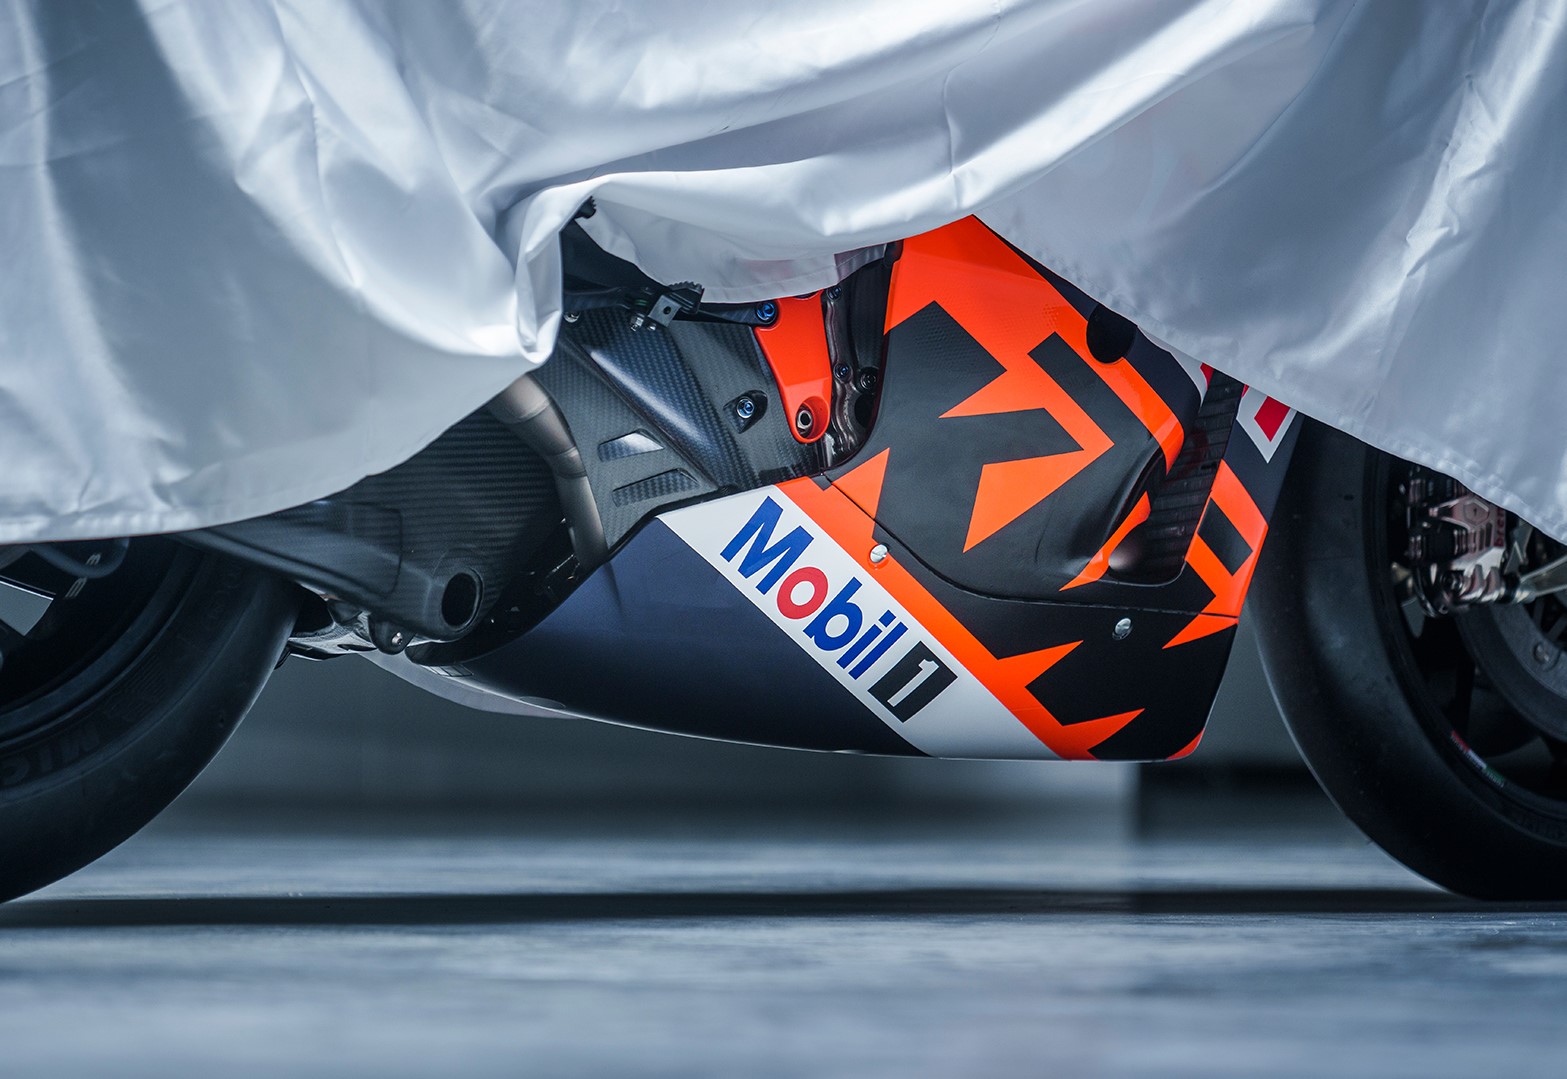 Mobil 1 and KTM